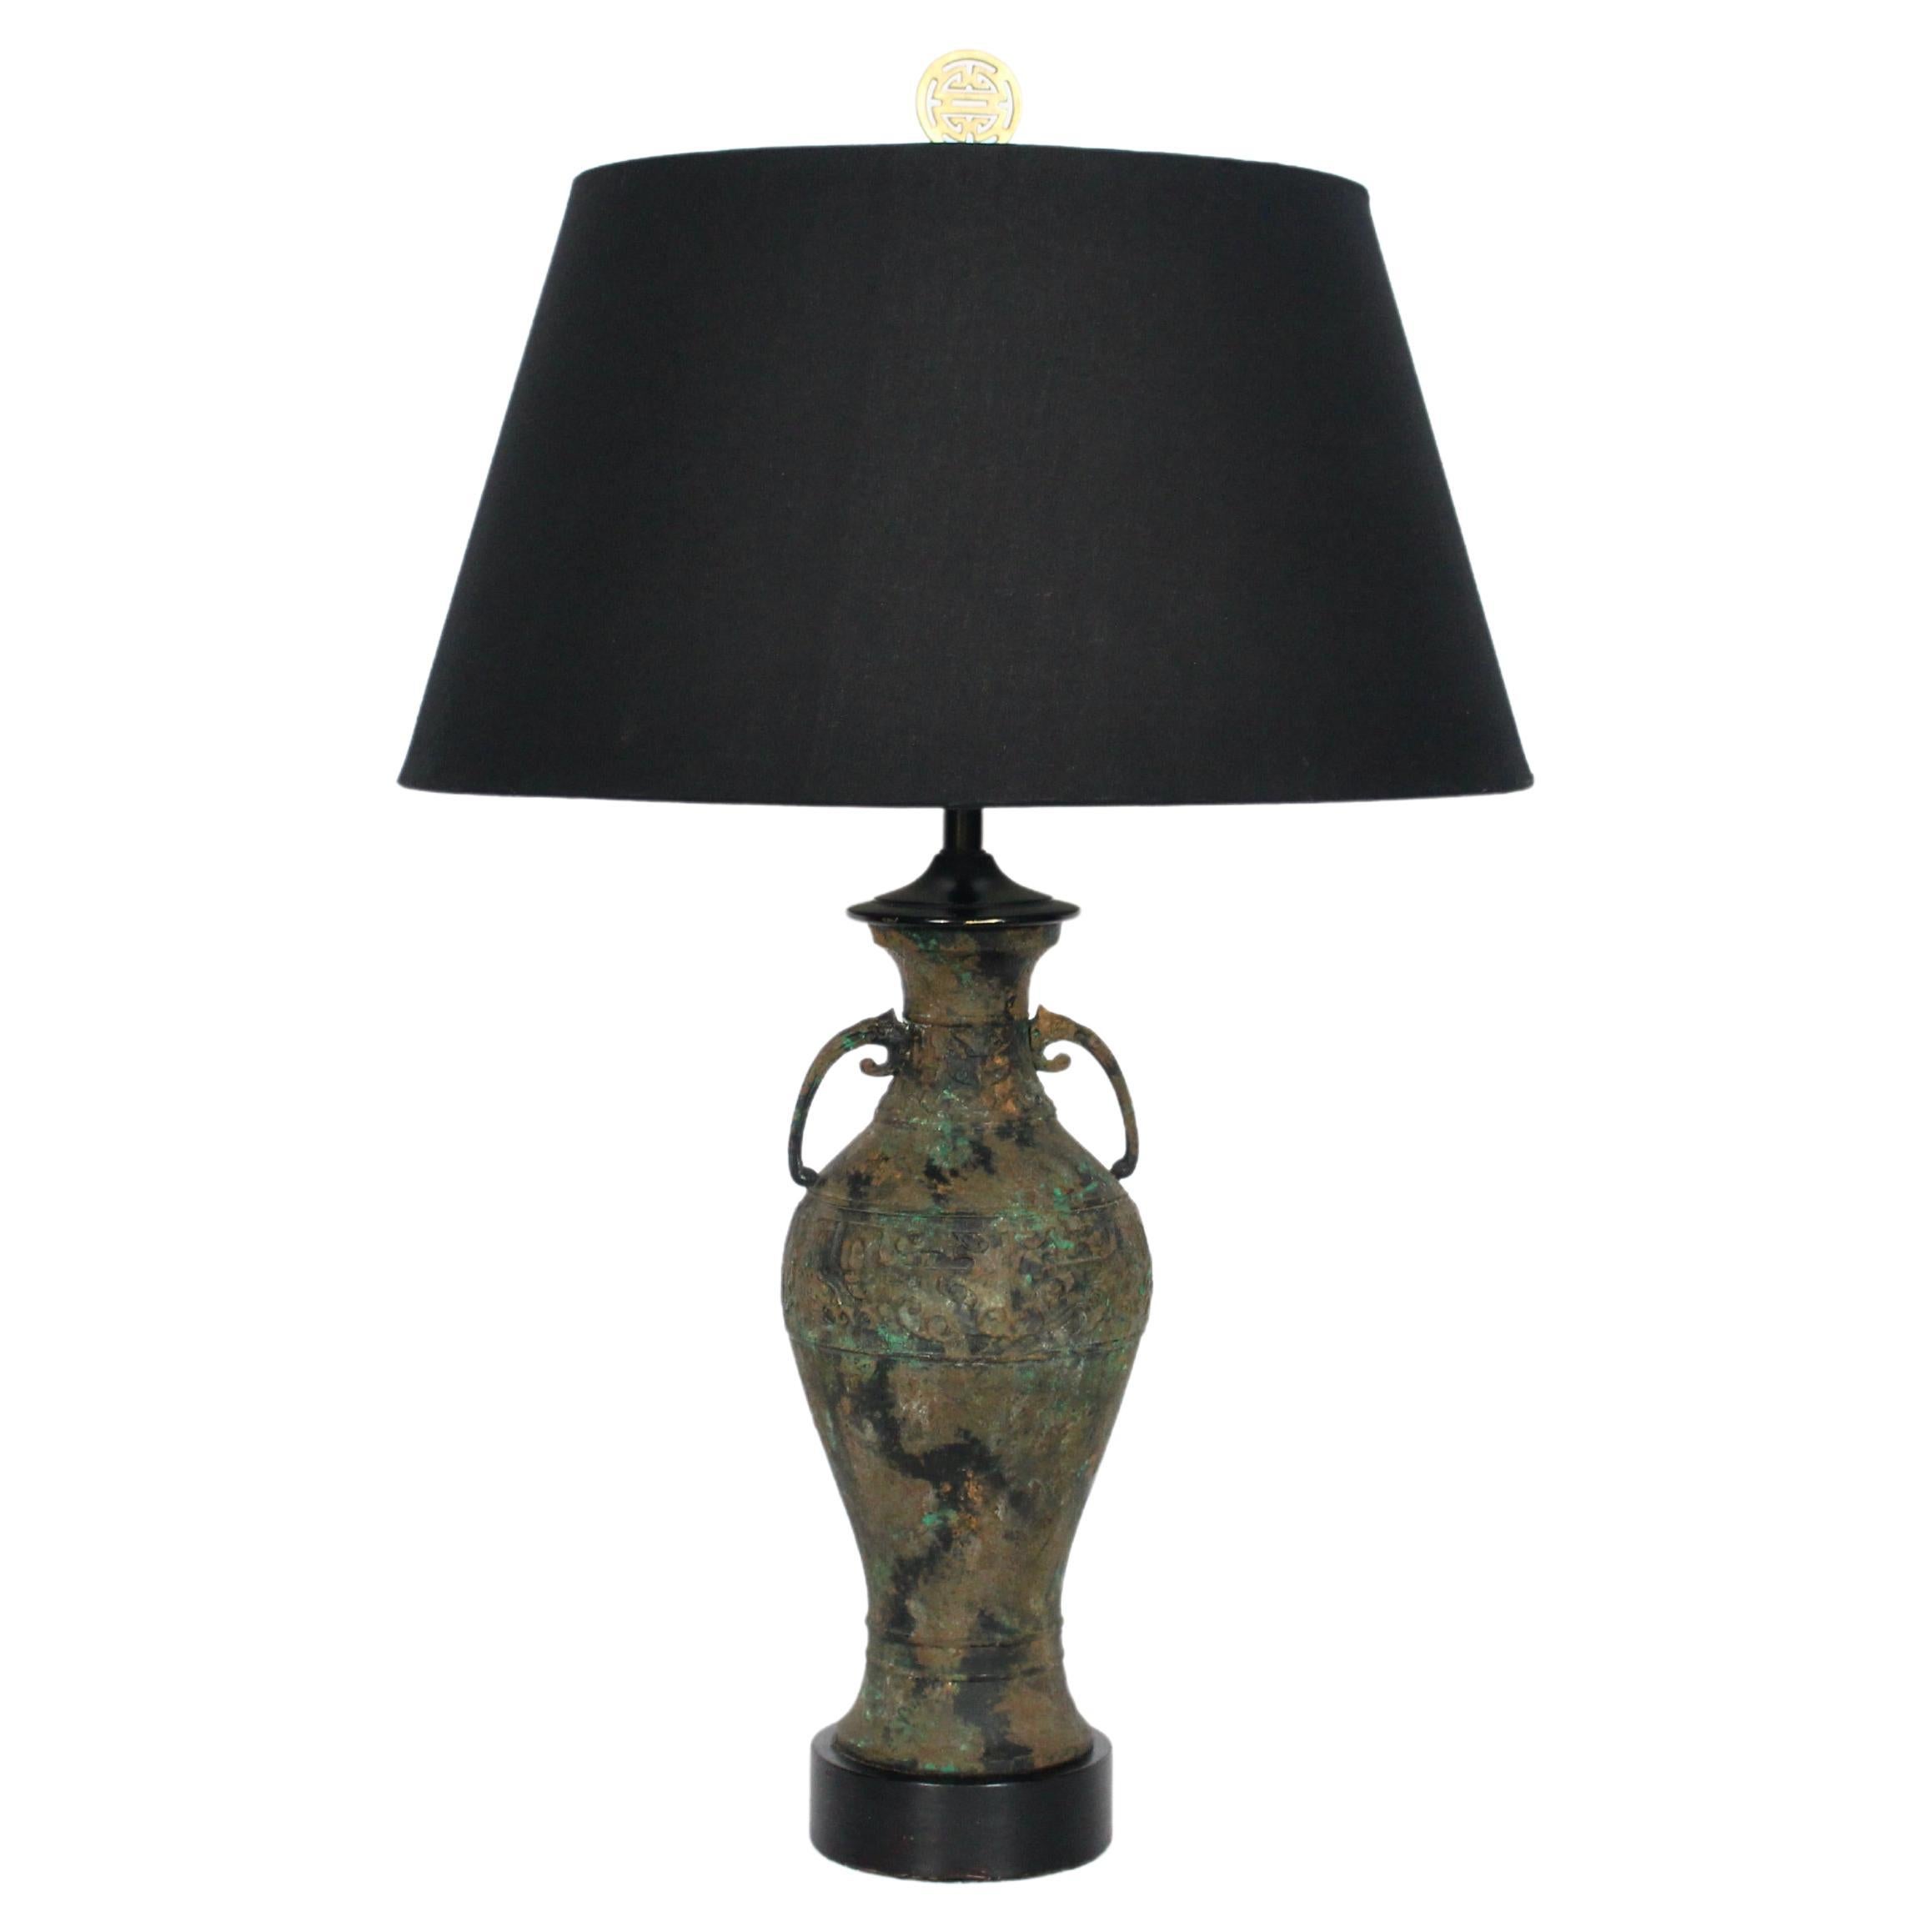 Tall Laurel Lamp Company Ancient Asian Style Bronze Verdigris Table Lamp, 1950's For Sale